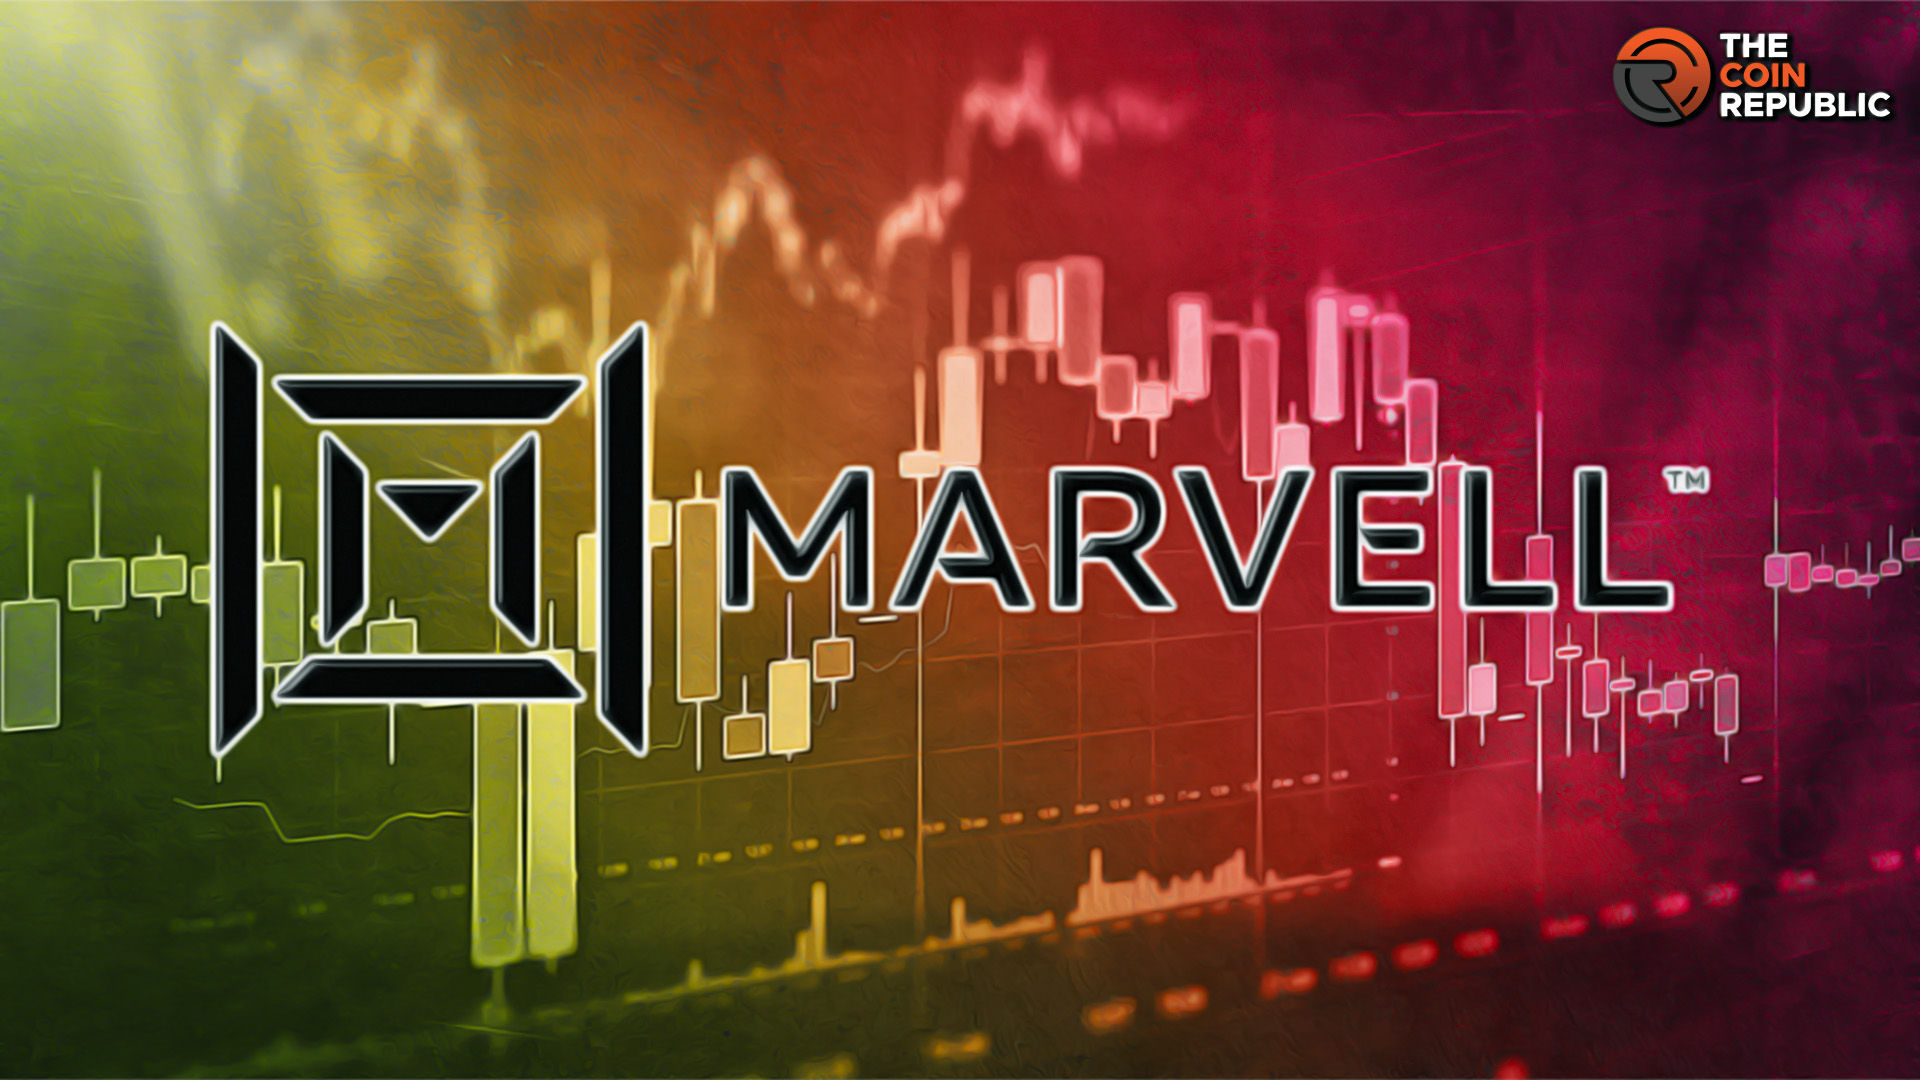 Marvell Technology (MRVL) Stock: What to Expect From Q2 Results? 